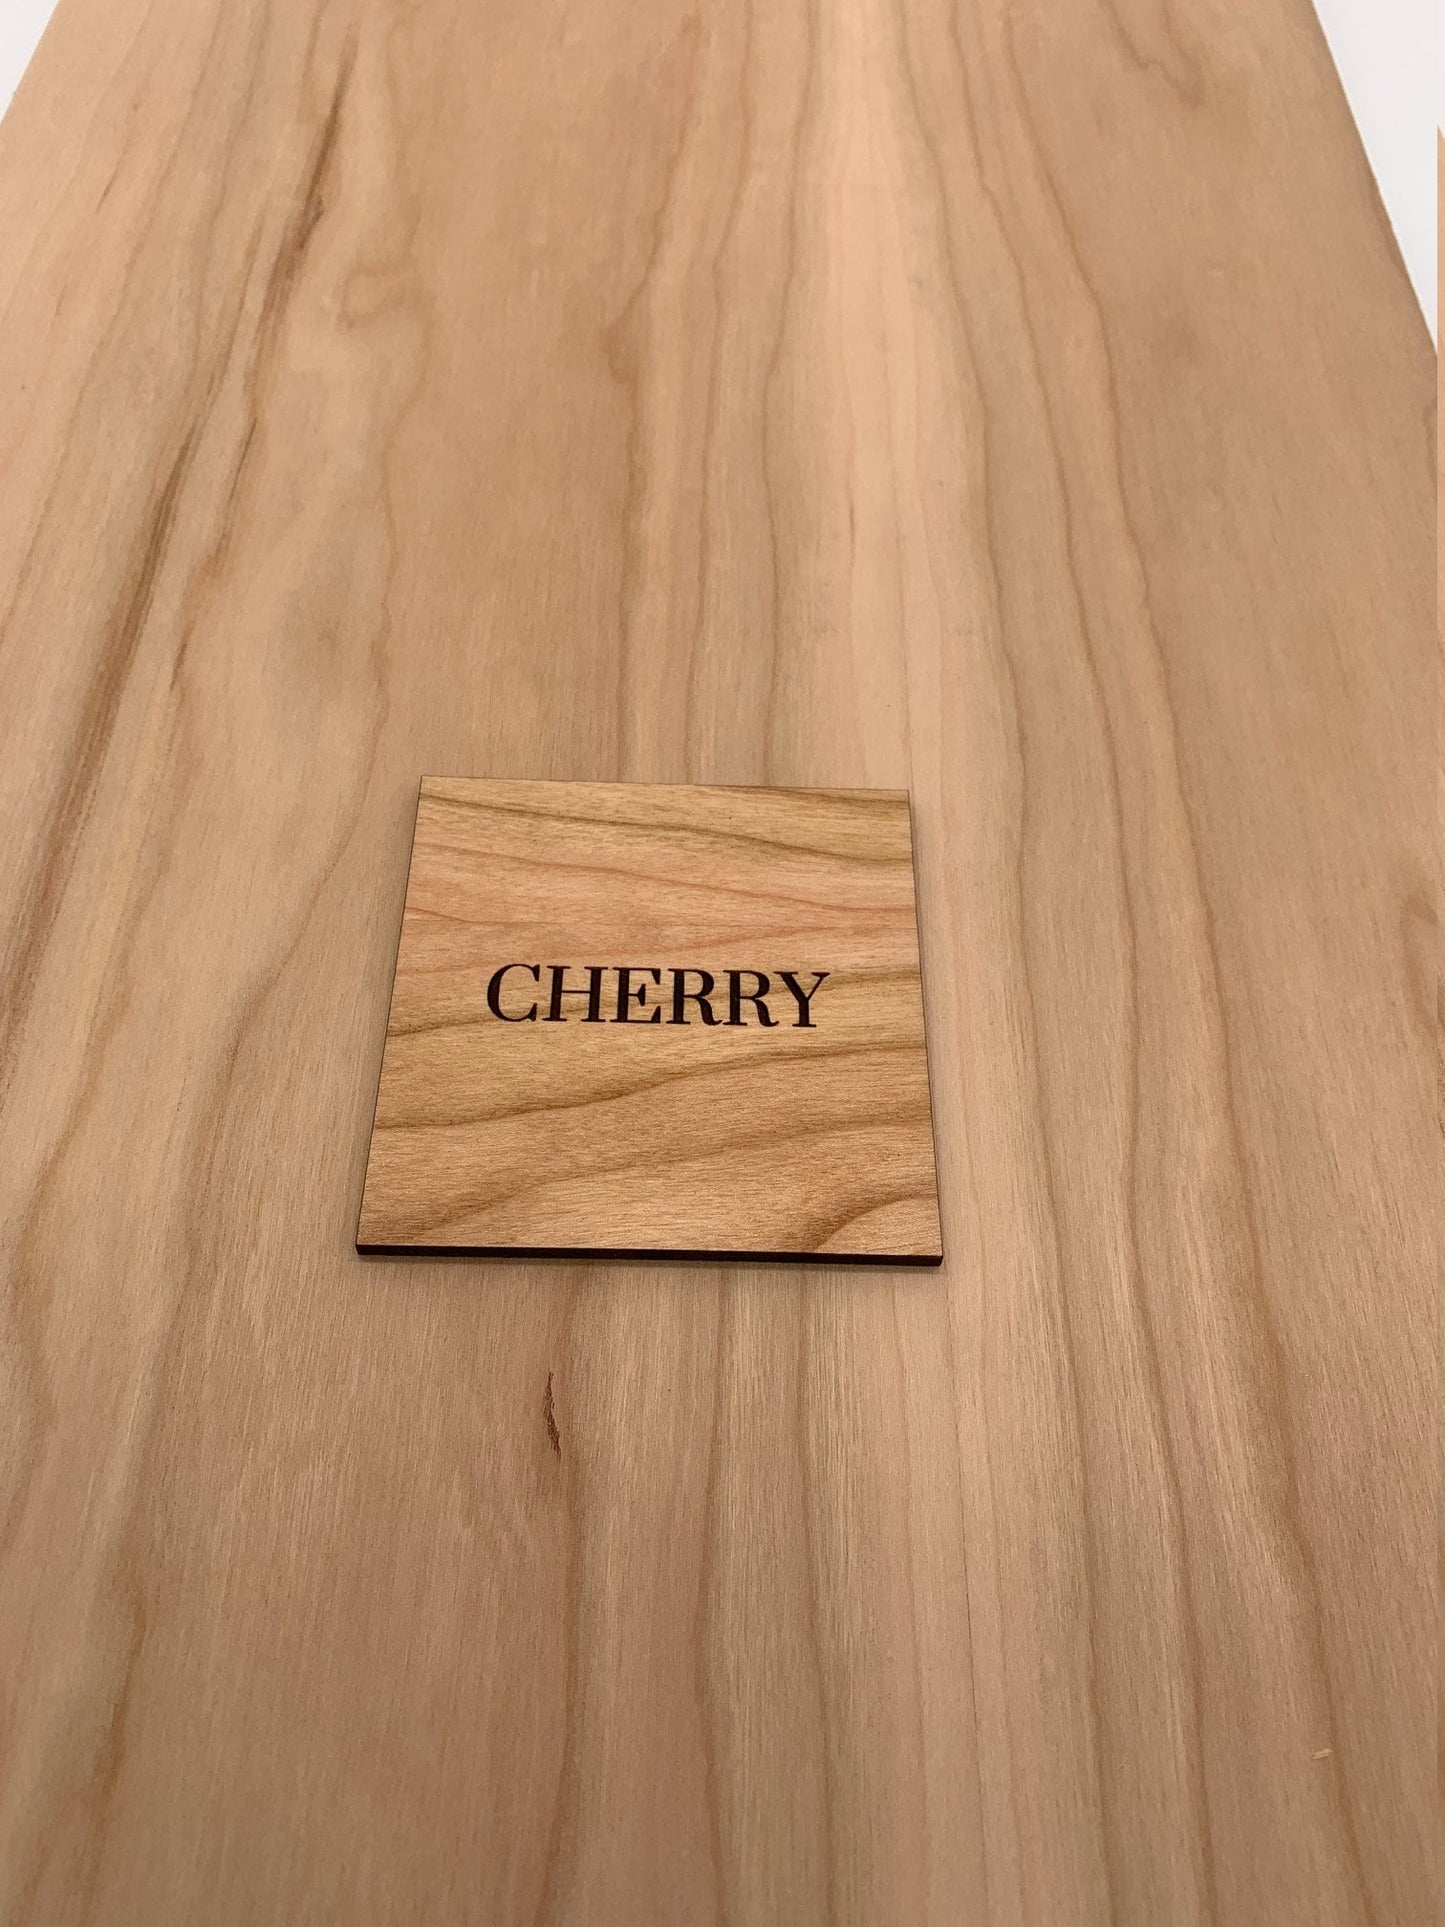 1/8 x 12 x 12 Alder Plywood - Perfect Laser Cutting & Engraving -  Cherokee Wood Products (32pcs)